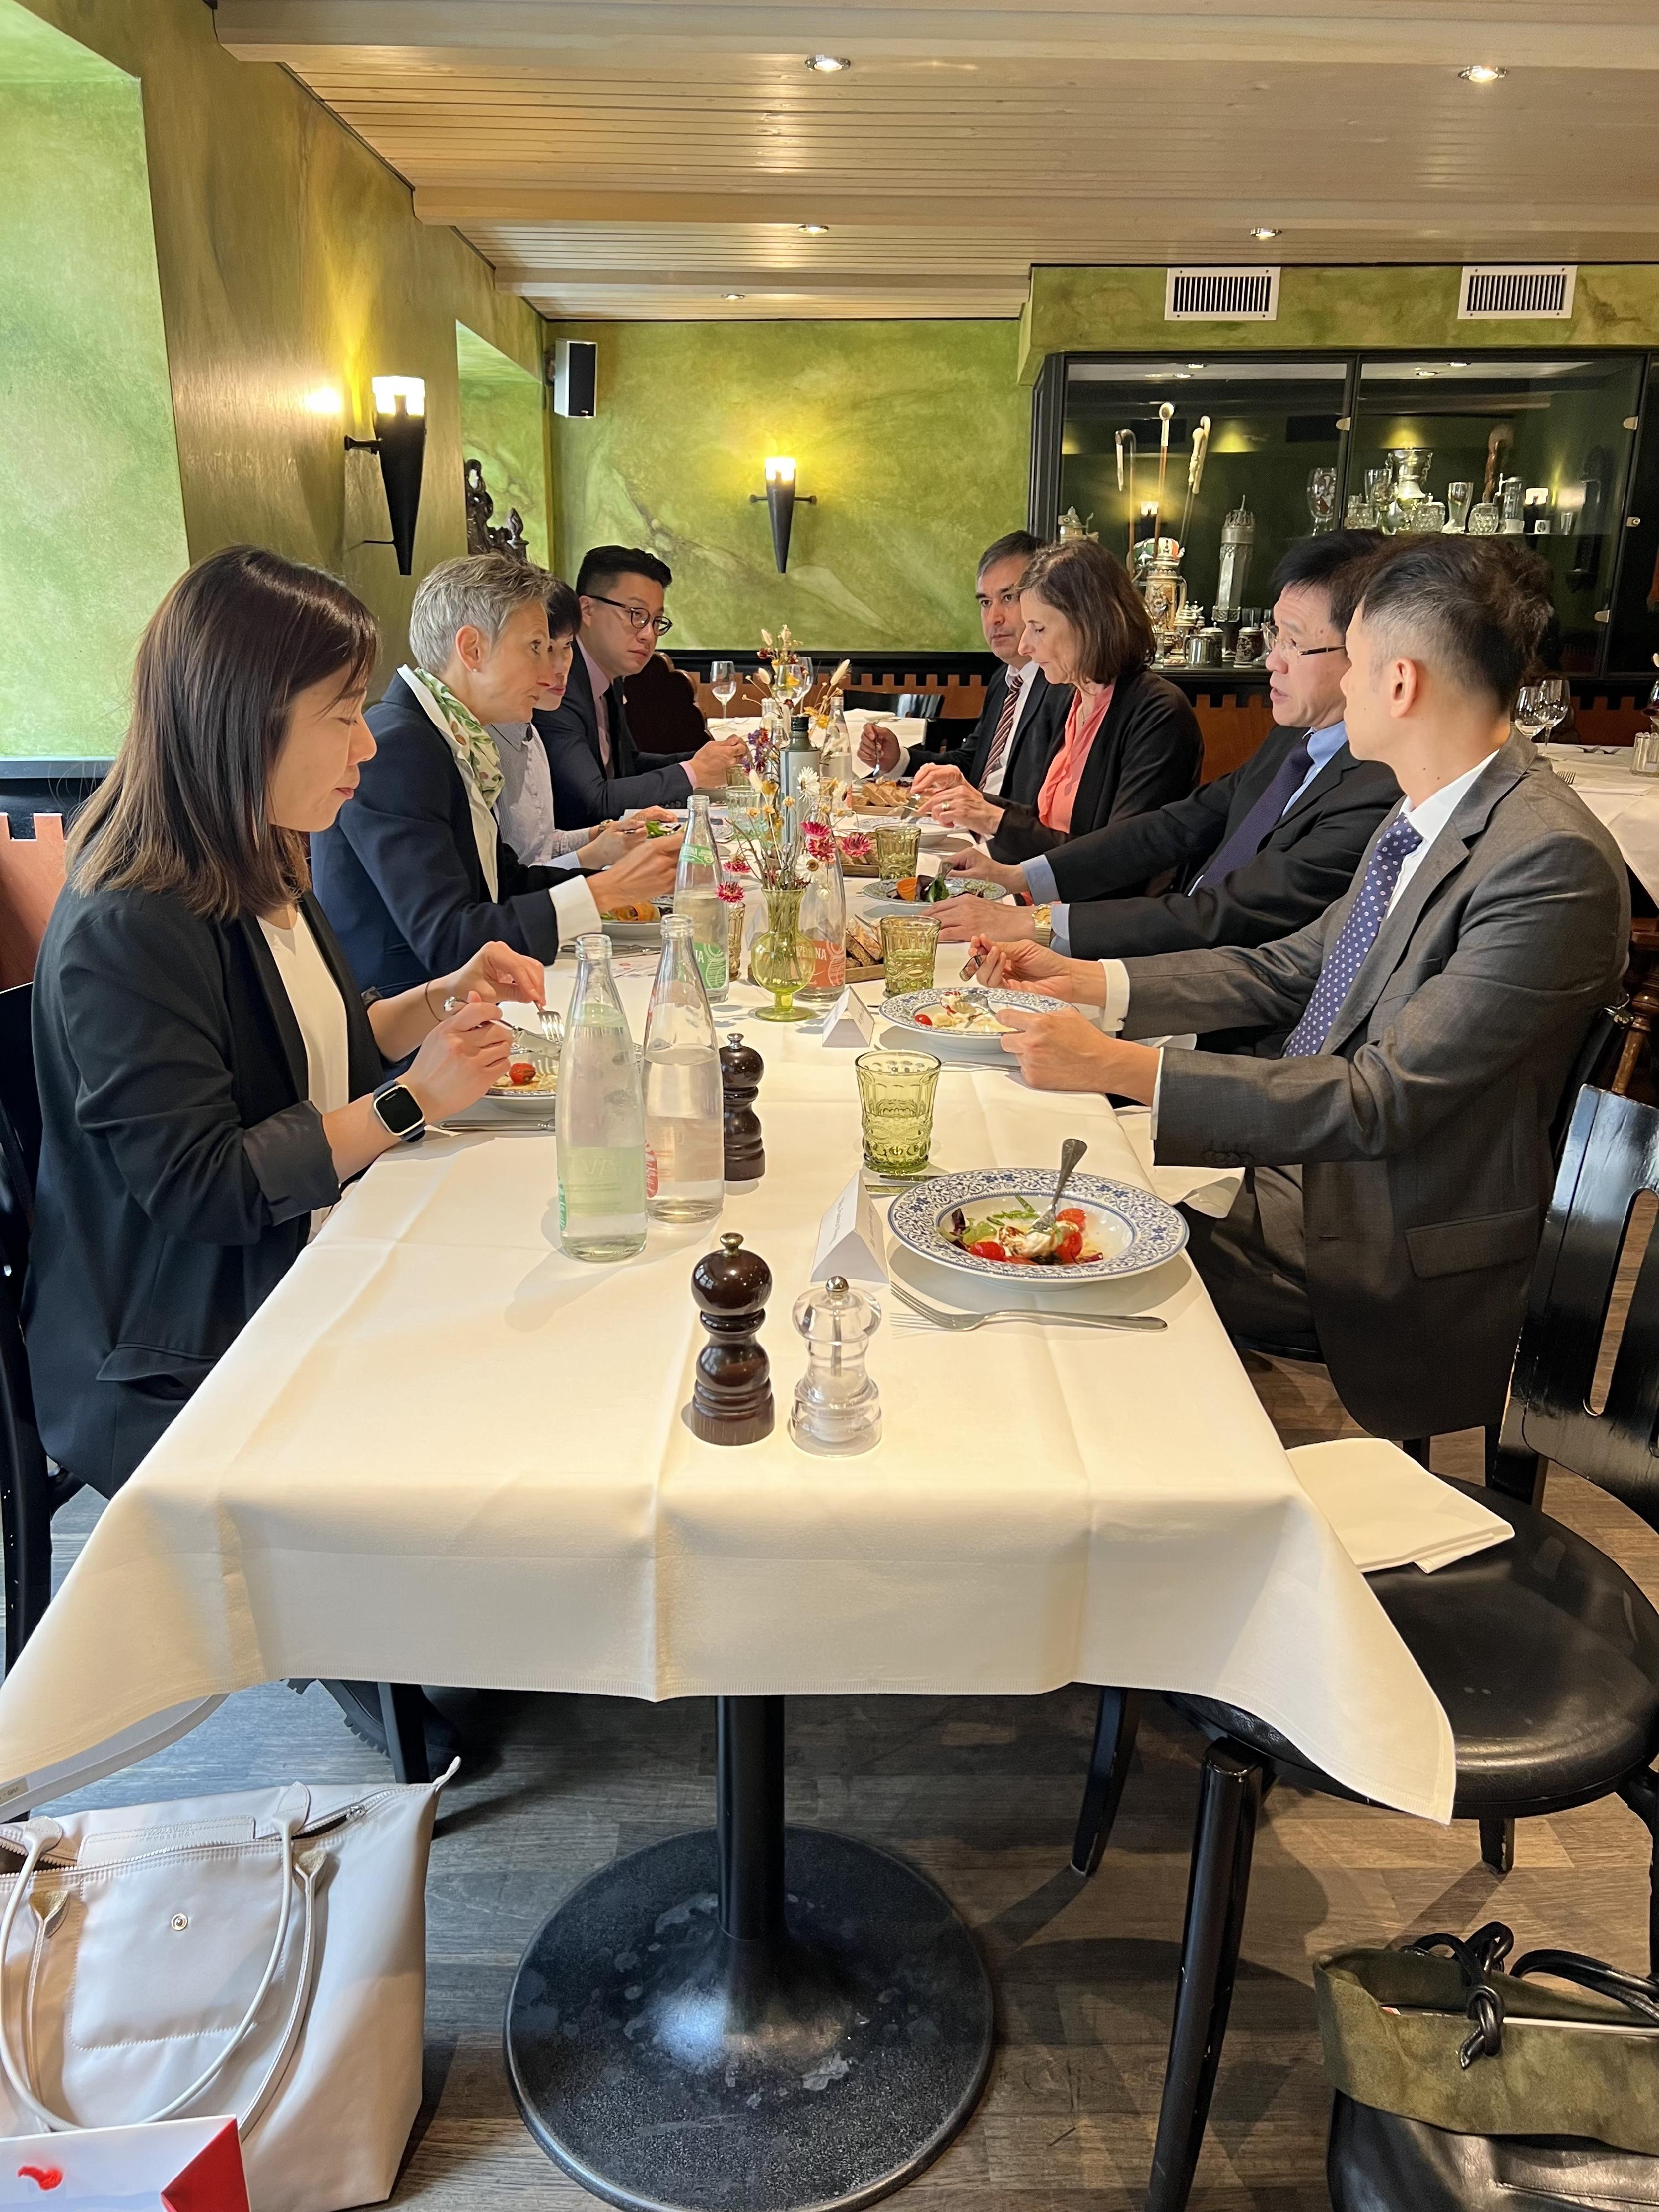 The Secretary for Innovation, Technology and Industry, Professor Sun Dong (second right), had a lunch meeting with Chief Executive Officer of the Greater Zurich Area, Ms Sonja Wollkopf, (second left), yesterday (April 26, Zurich time).